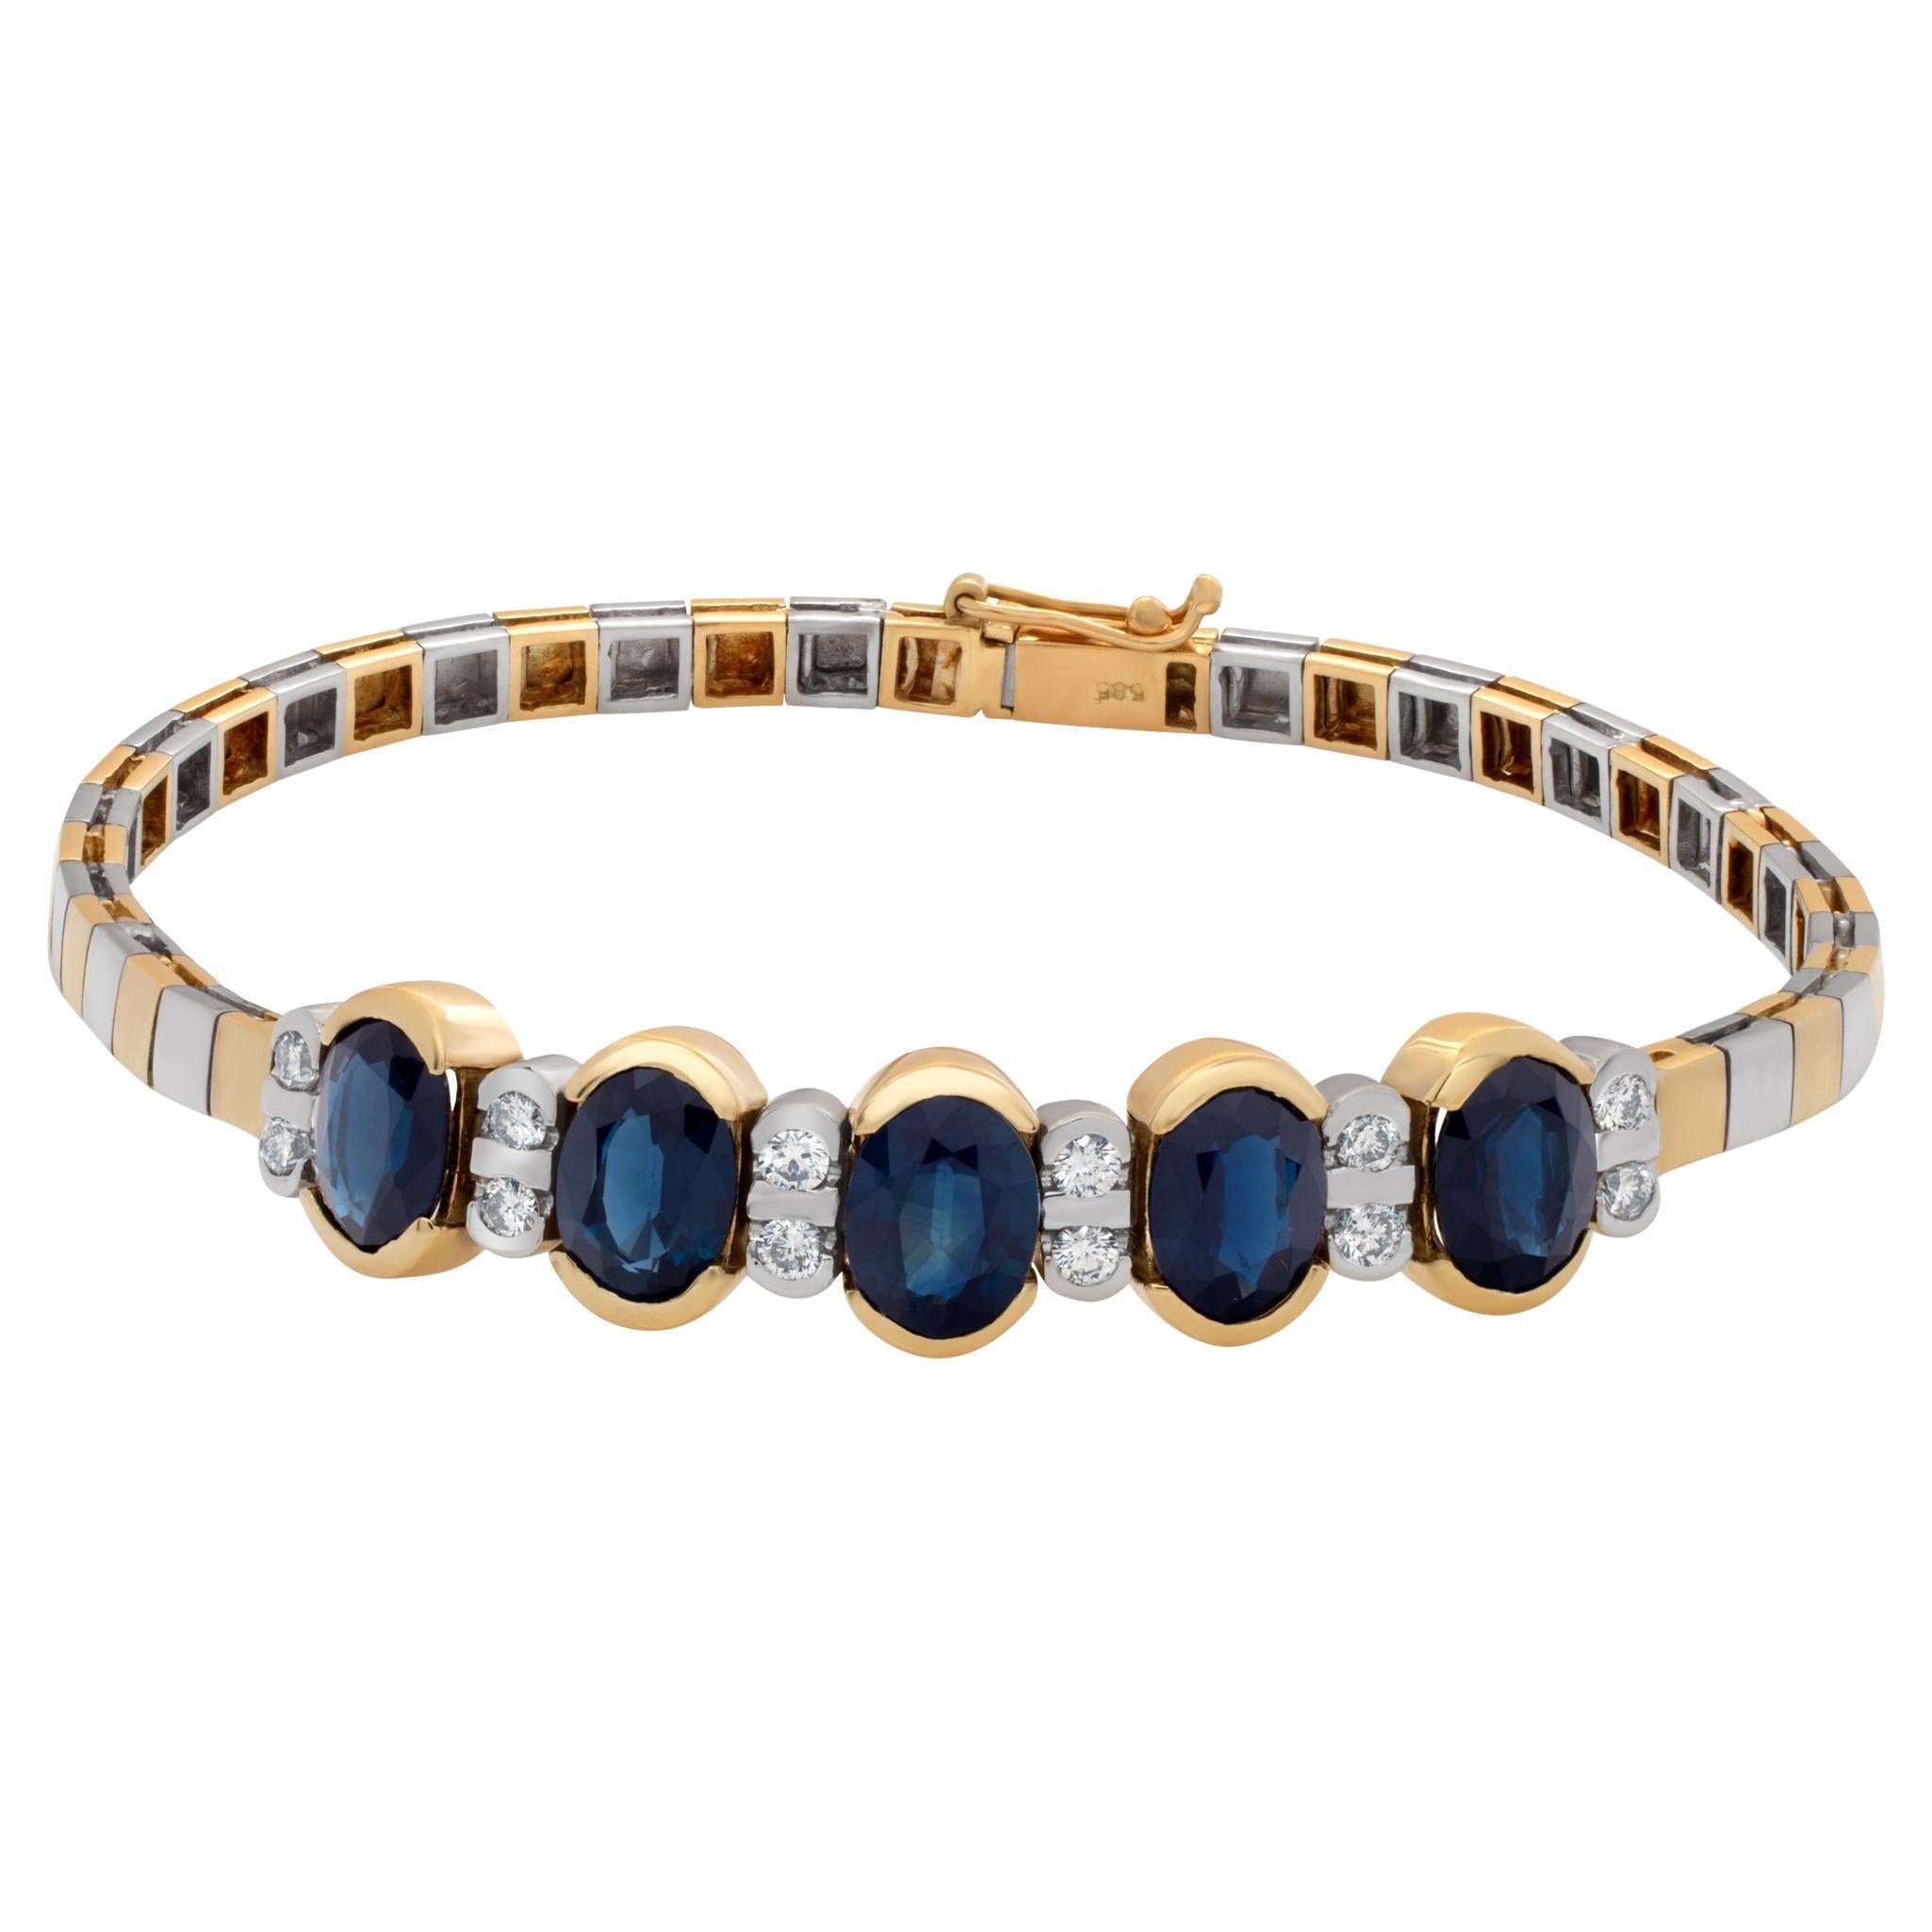 Sapphire and Diamond Bracelet Set in 14K White and Yellow Gold